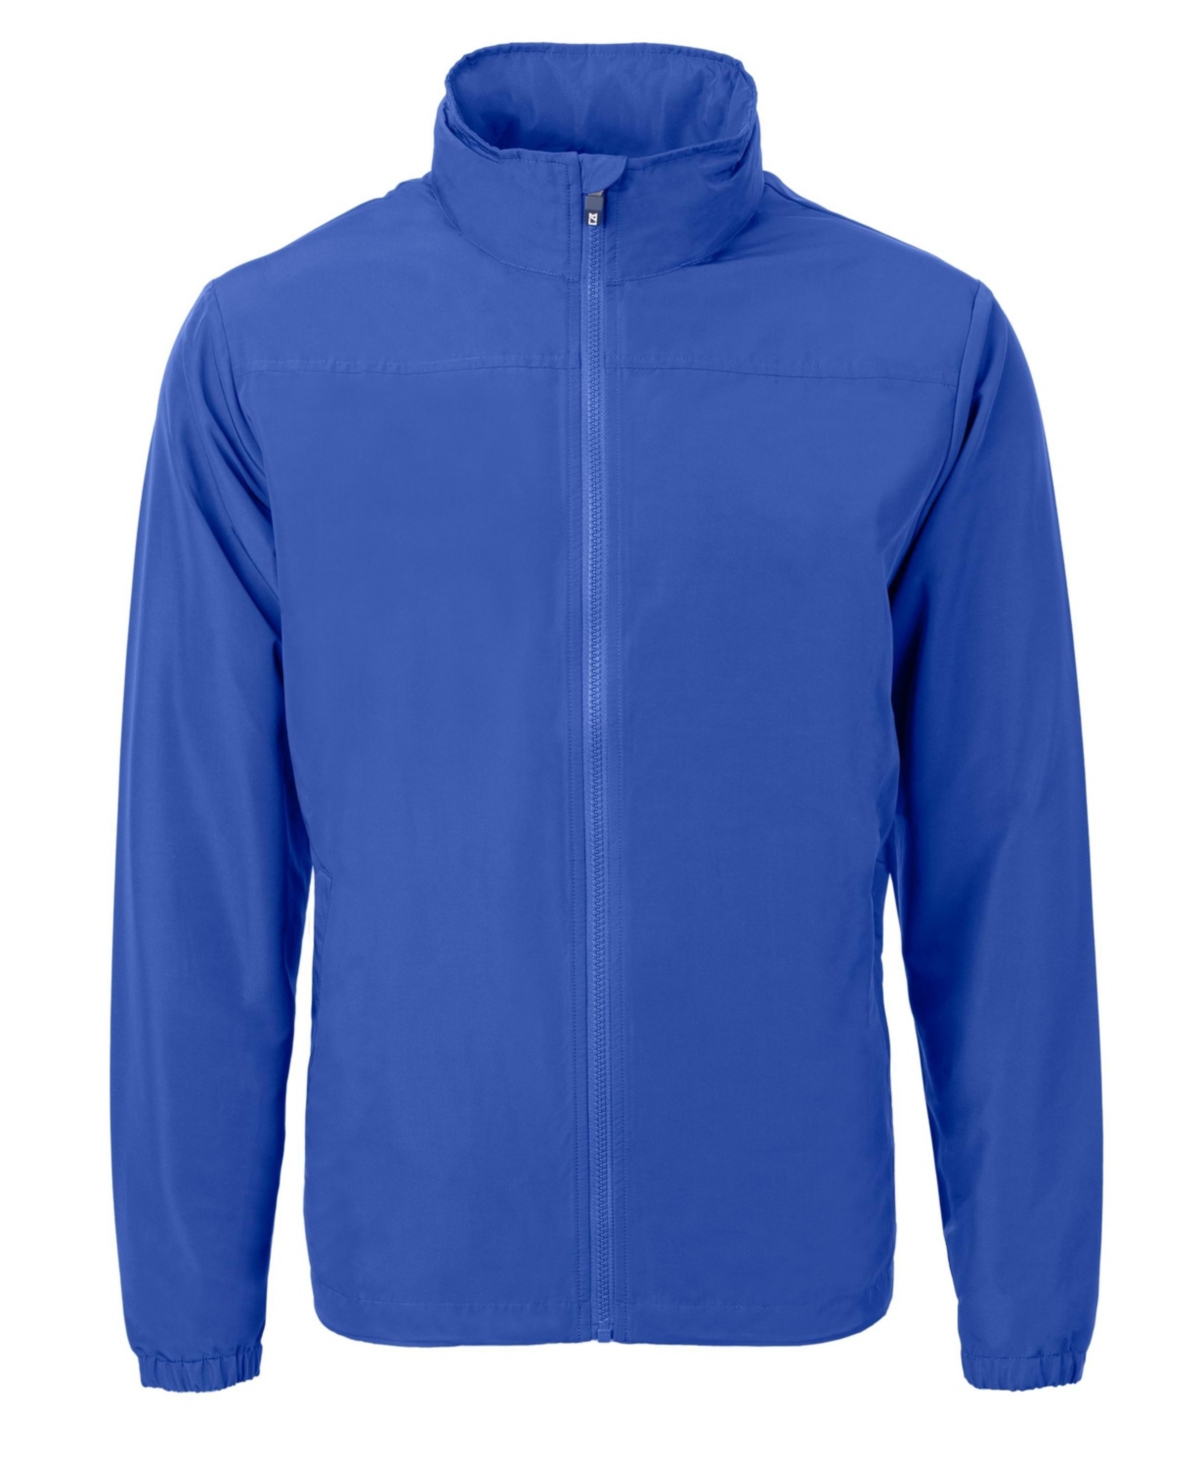 Cutter Buck Charter Eco Knit Recycled Mens Full-Zip Jacket - Tour blue